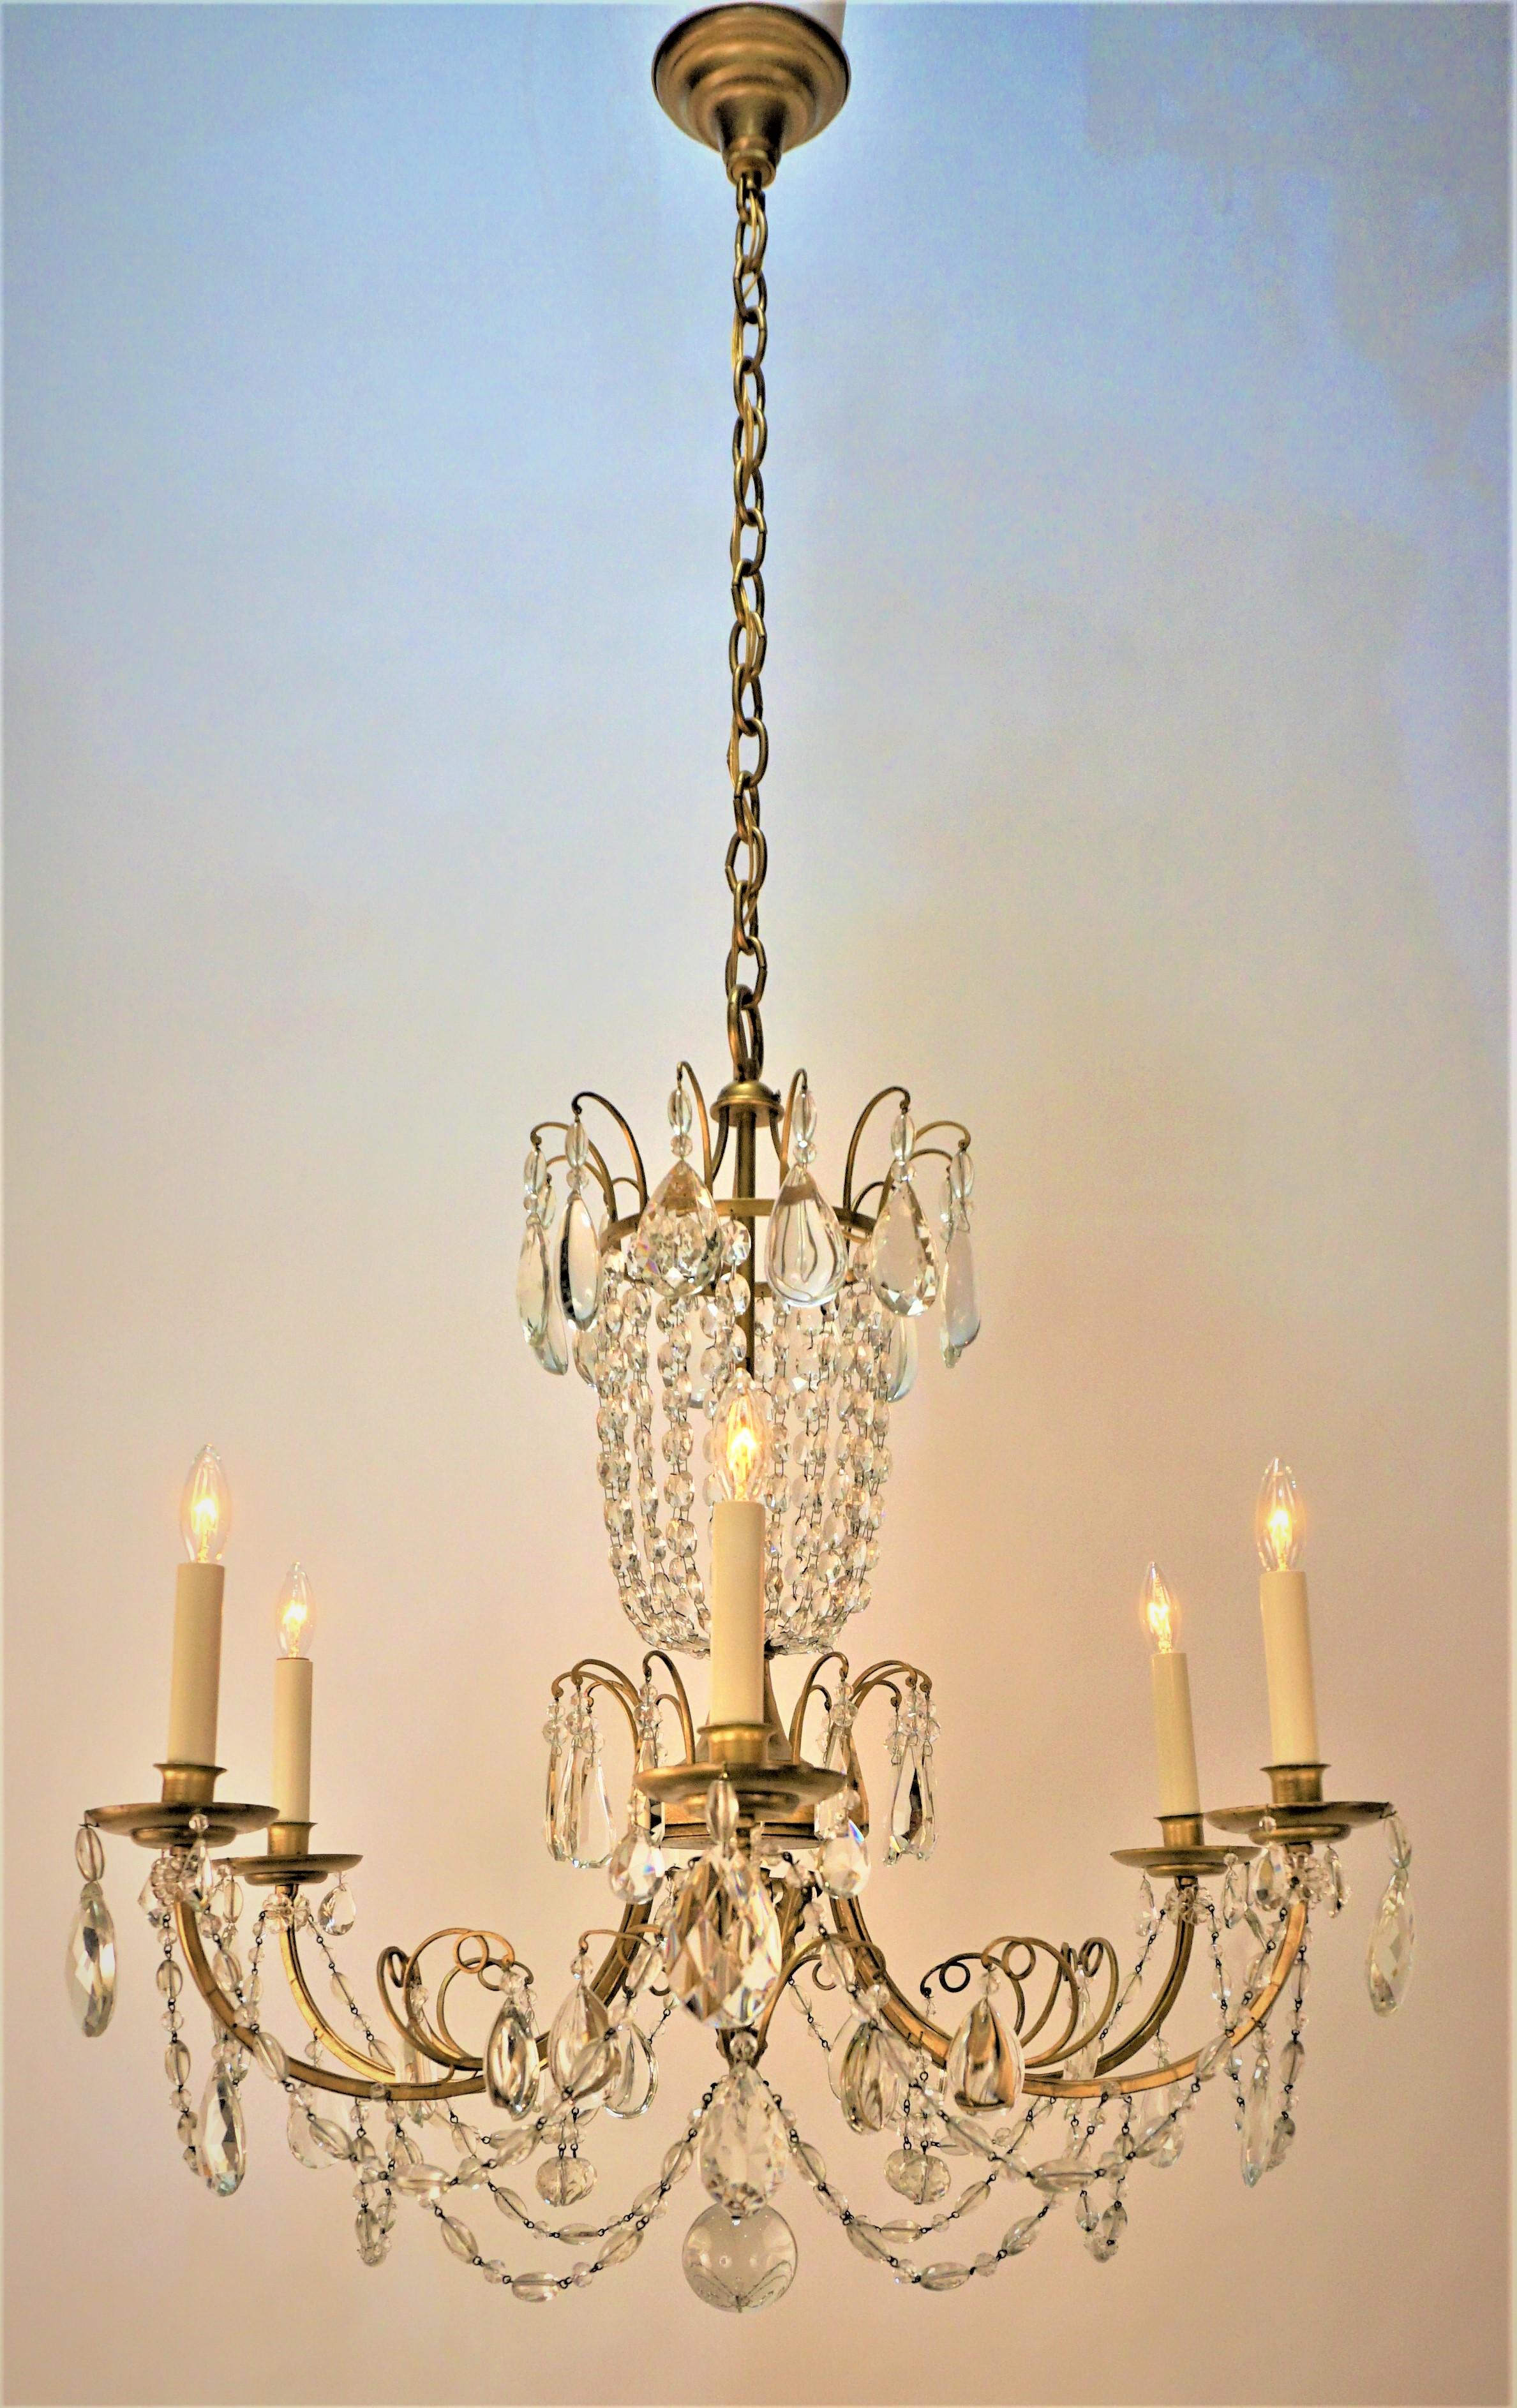 1930's Gilt iron faceted crystal six arm French chandelier.
75 watts max each light.
Measurement: width 29